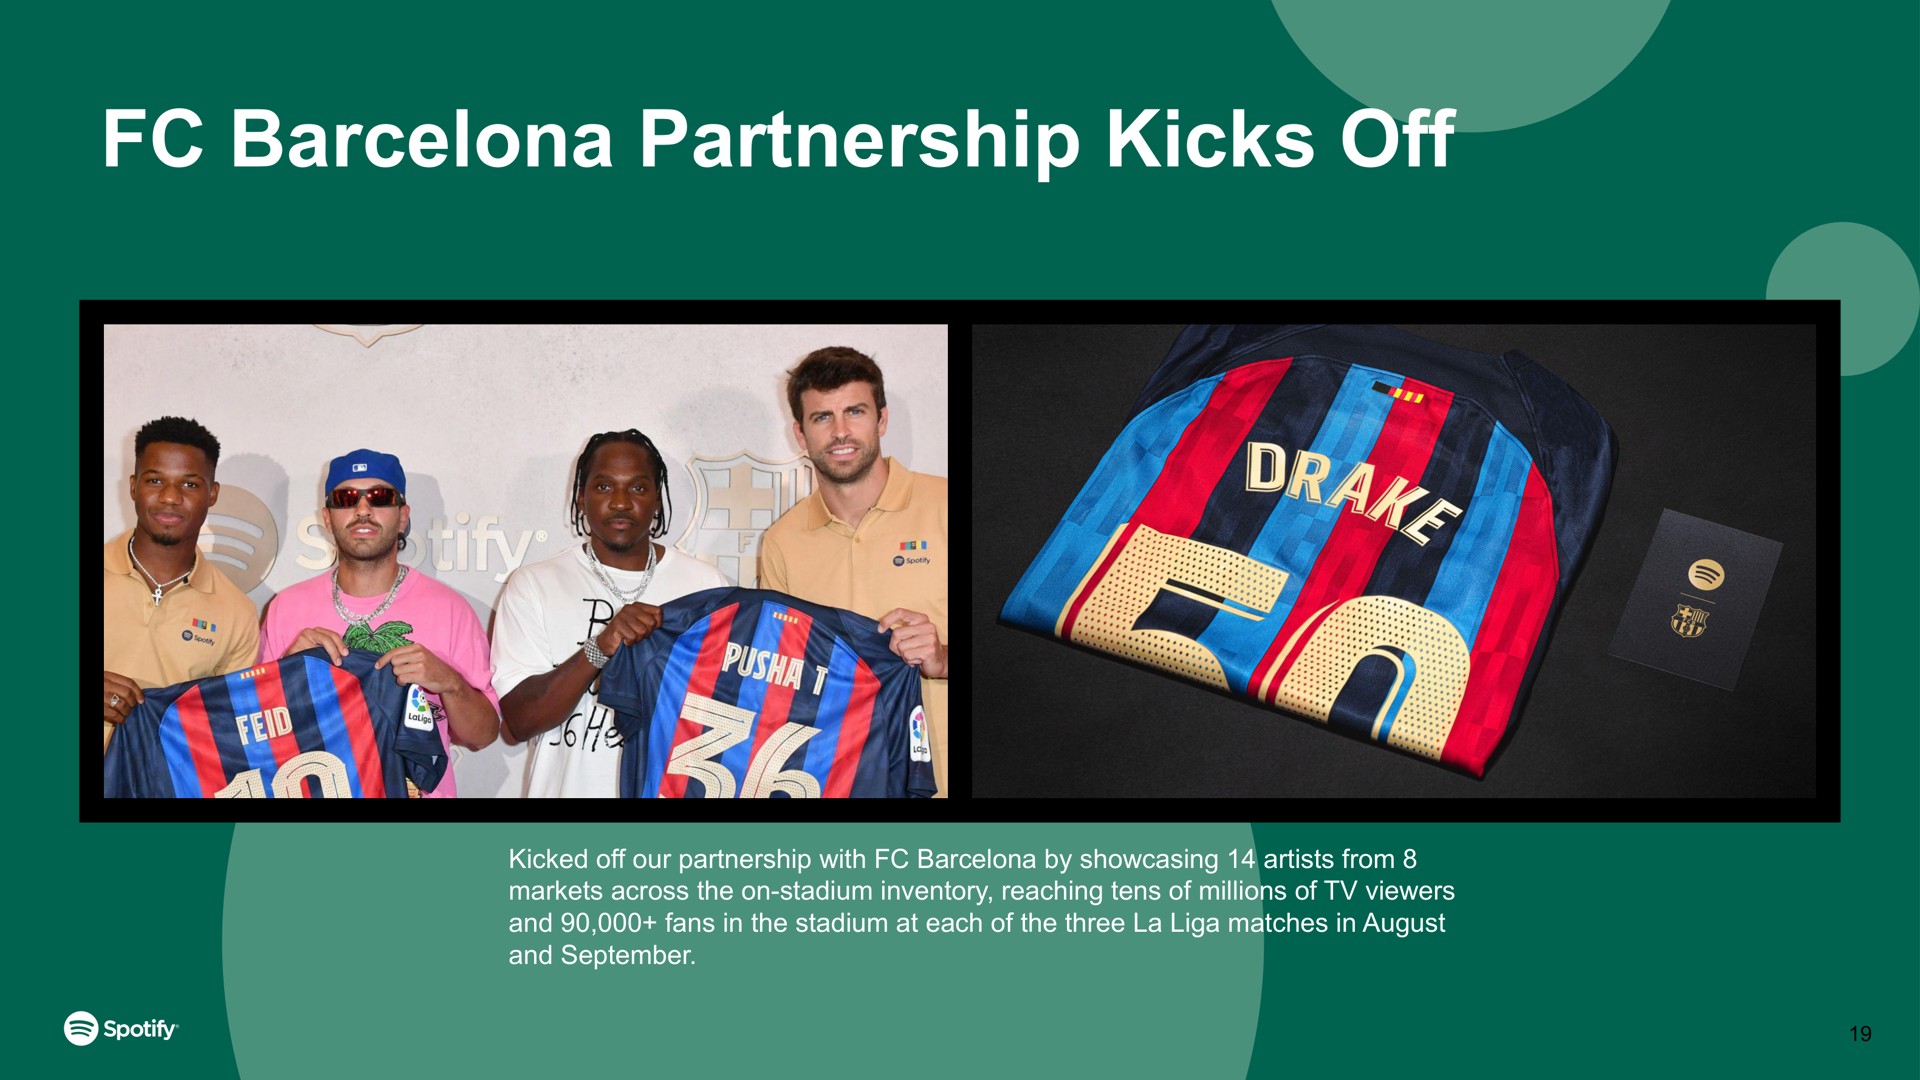 barcelona partnership kicks off kicked our with by artists from markets across the on stadium inventory reaching tens of millions of viewers and fans in the stadium at each of the three matches in august and | Spotify